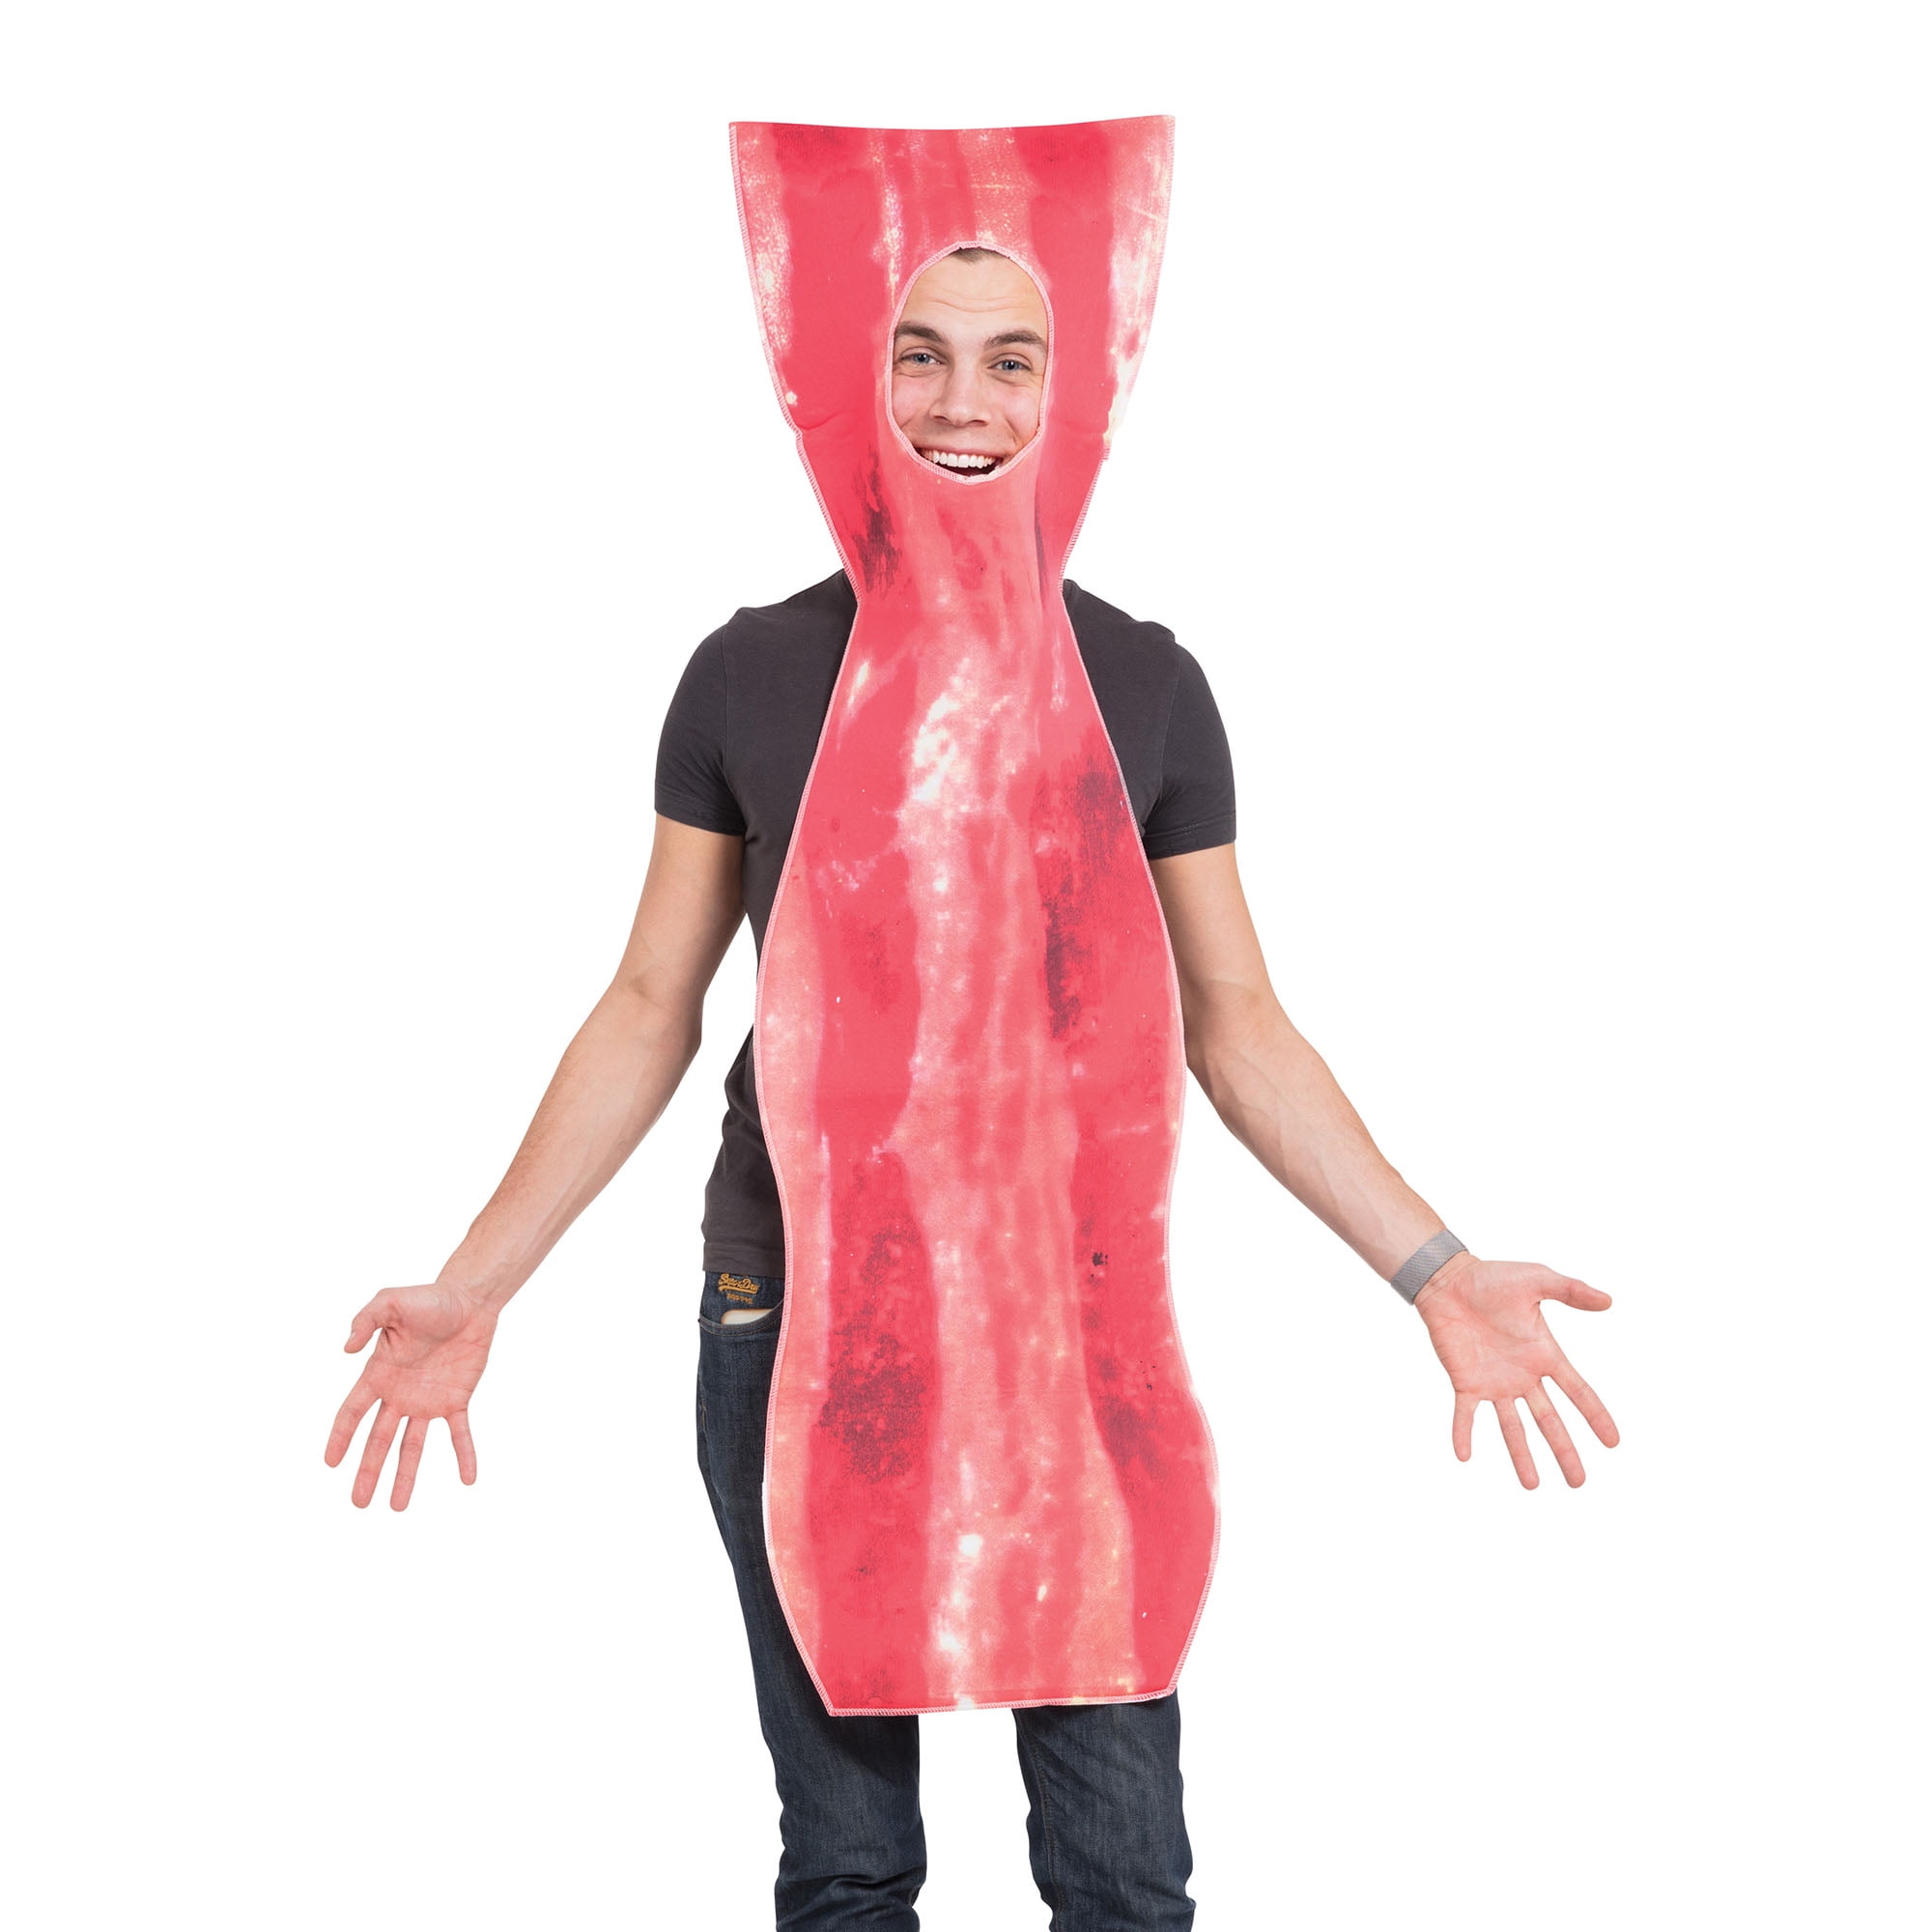 Bacon costume sexy Sexy Costumes